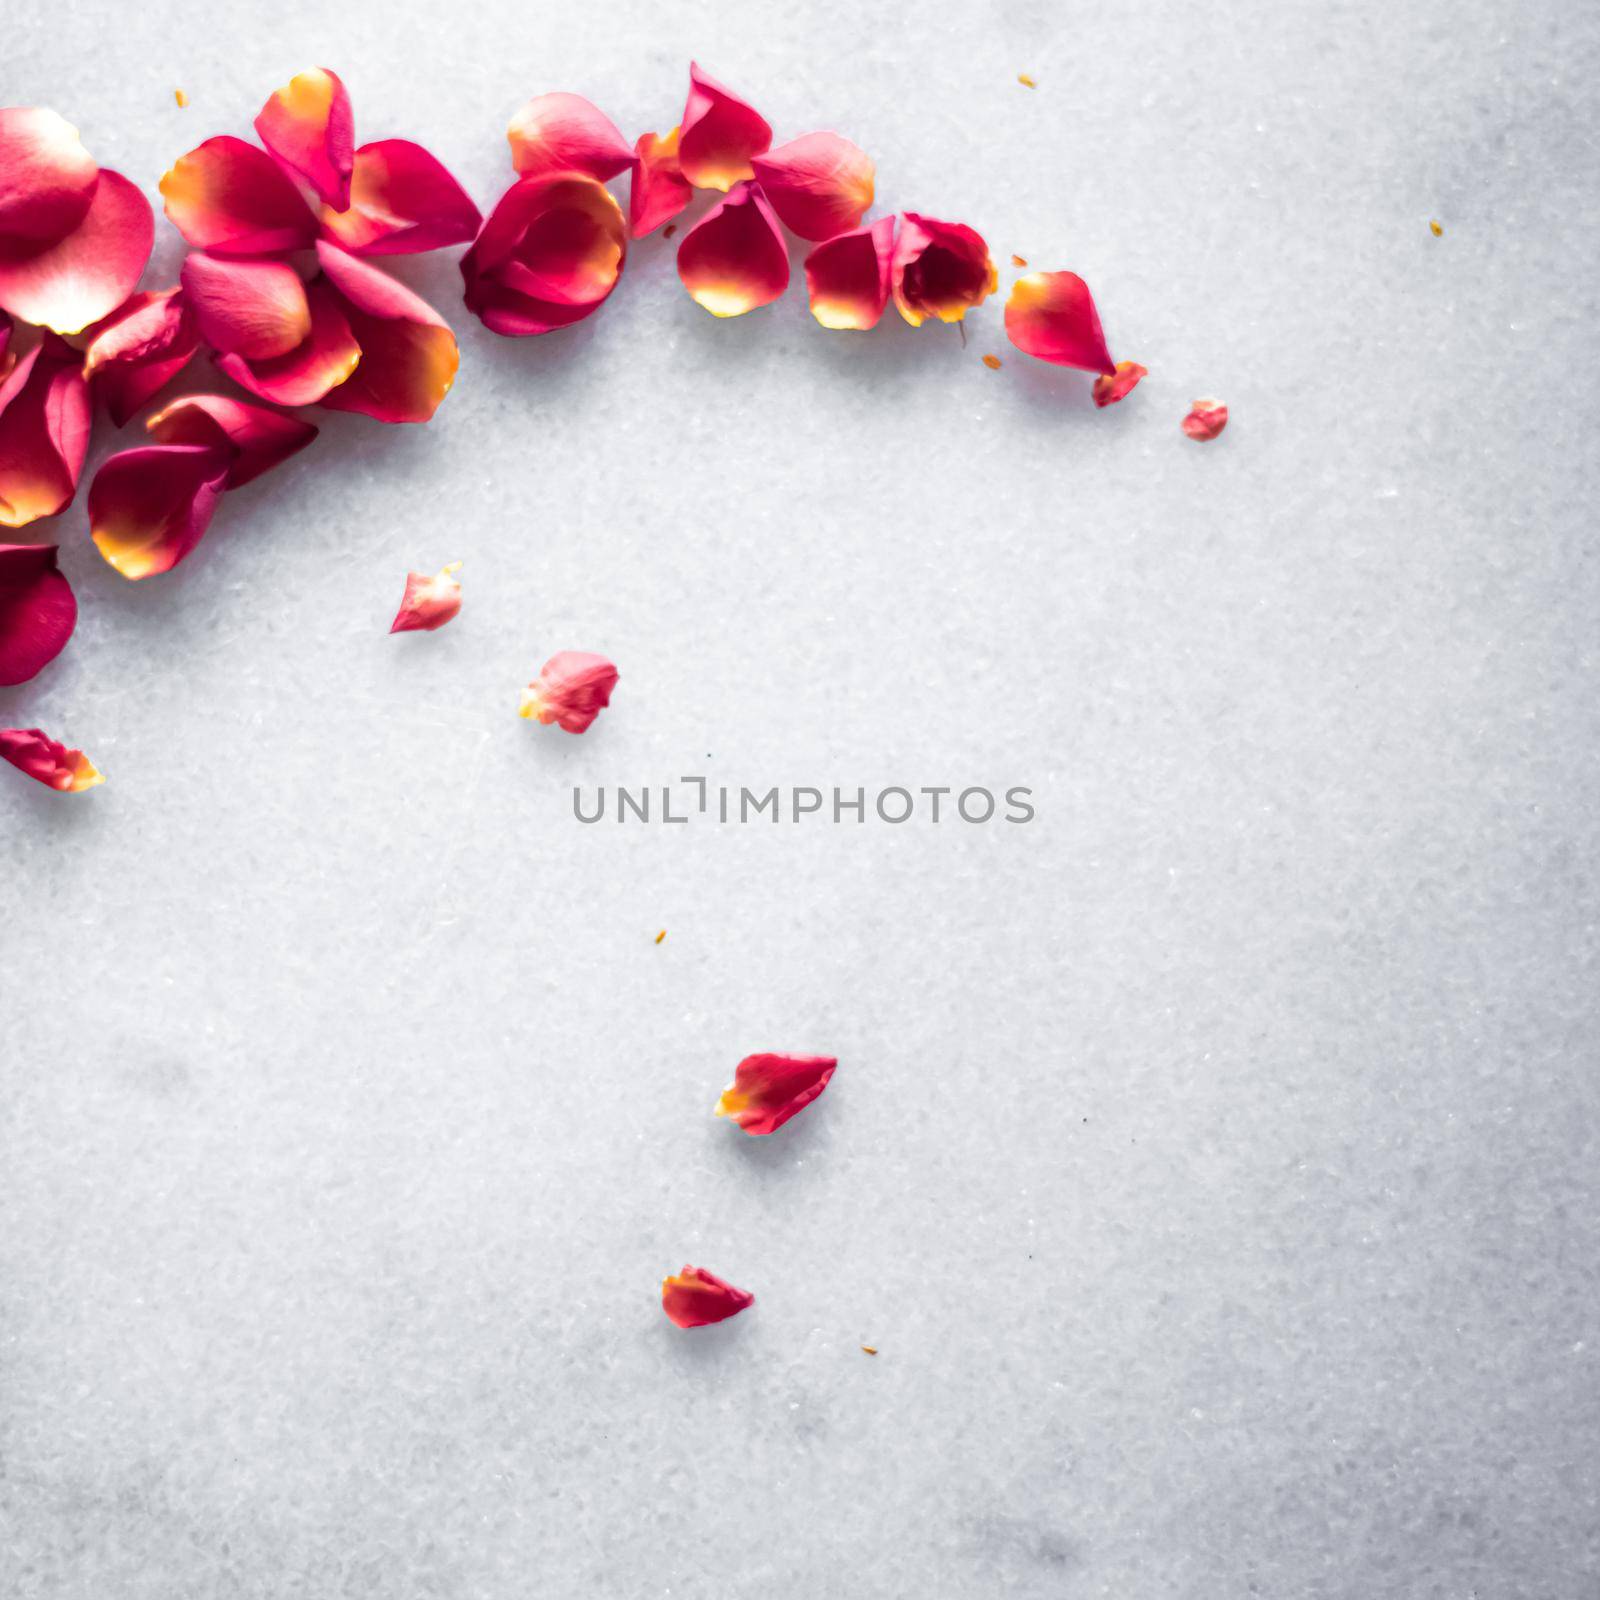 Rose petals on marble background, floral decor and wedding flatlay, holiday greeting card backdrop for event invitation, flat lay design.